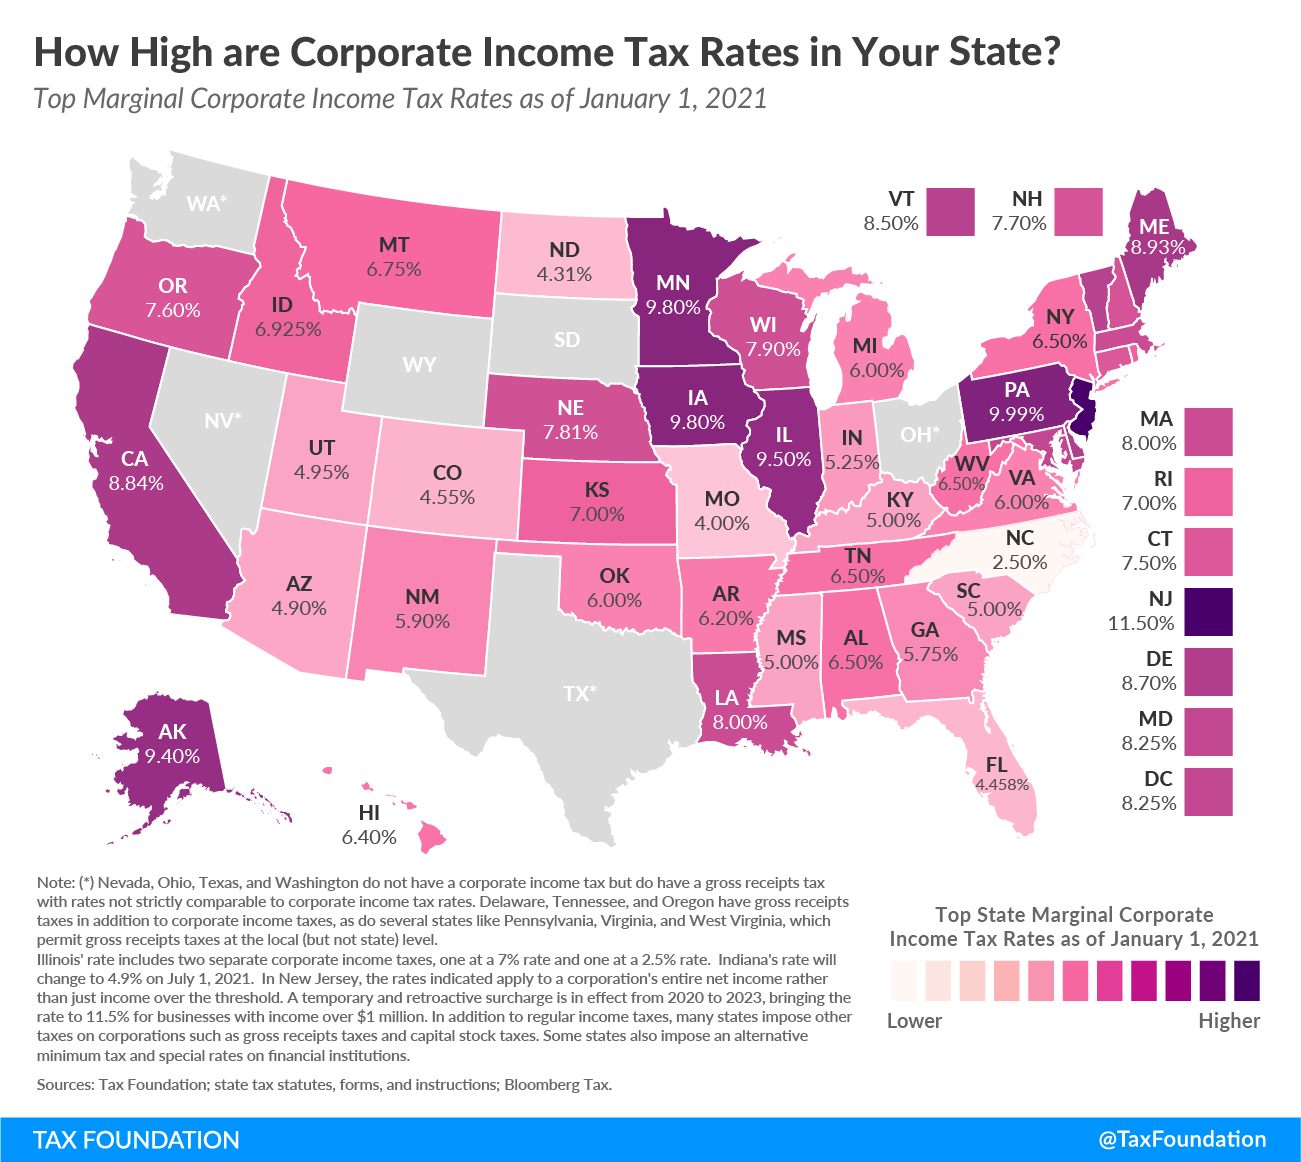 2021 state corporate income tax rates and brackets. 2021 state corporate tax rates. What are the state corporate tax rates for 2021? Which state has the lowest corporate tax rate? Lowest state corporate tax rate